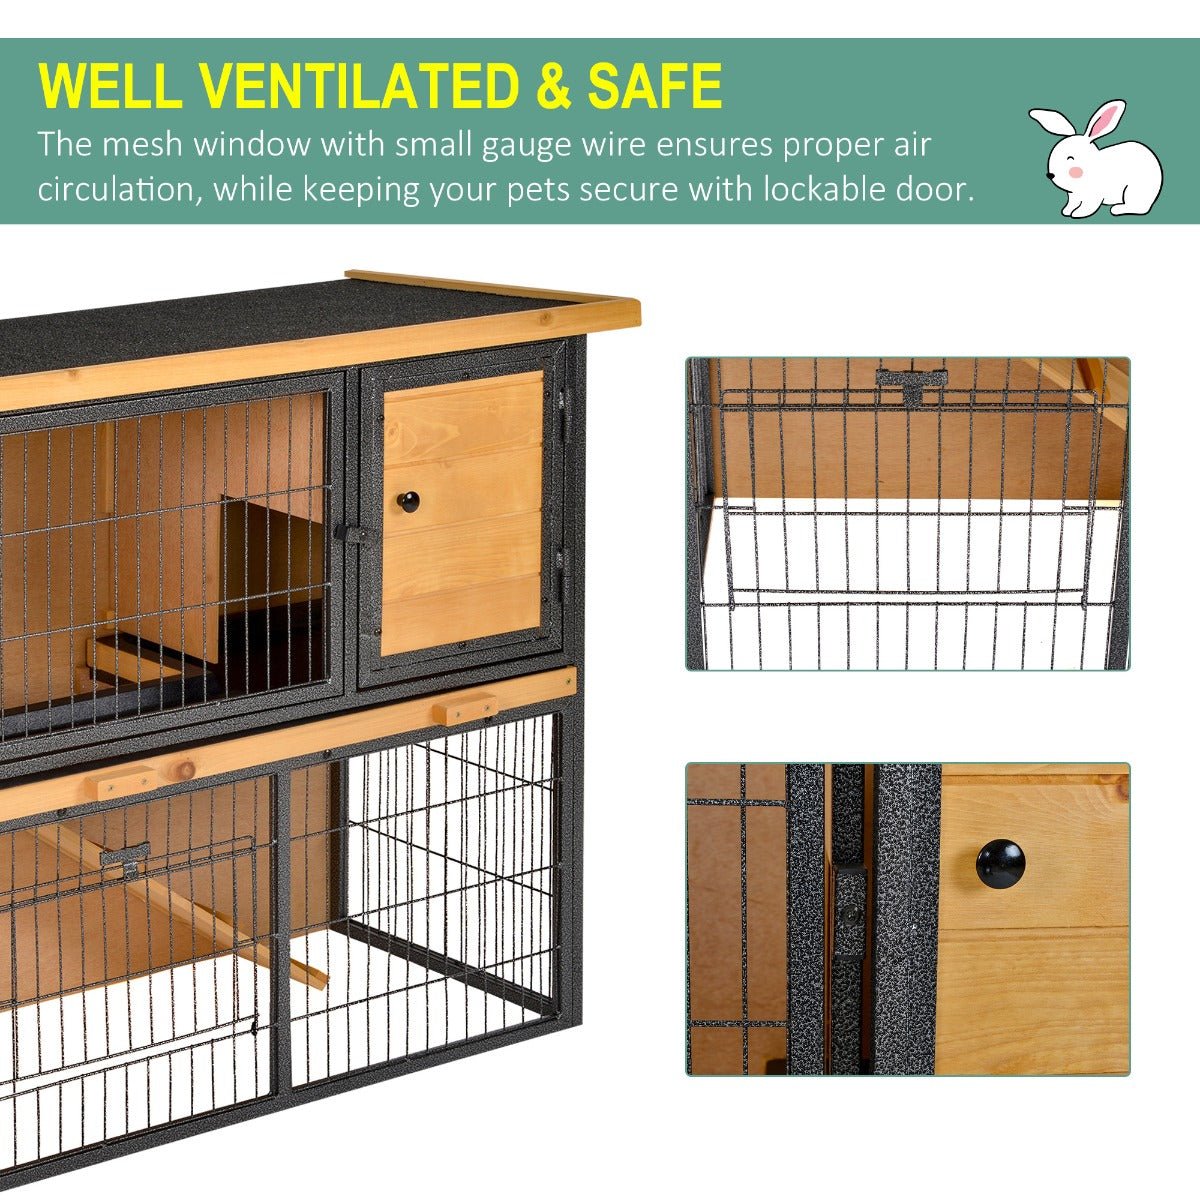 Wood-metal Rabbit Hutch Guinea Pig Hutch Elevated Pet House Bunny Cage with Slide-Out Tray Openable Roof Outdoor 89.5 x 45 x 81cm Light Yellow, PawHut,